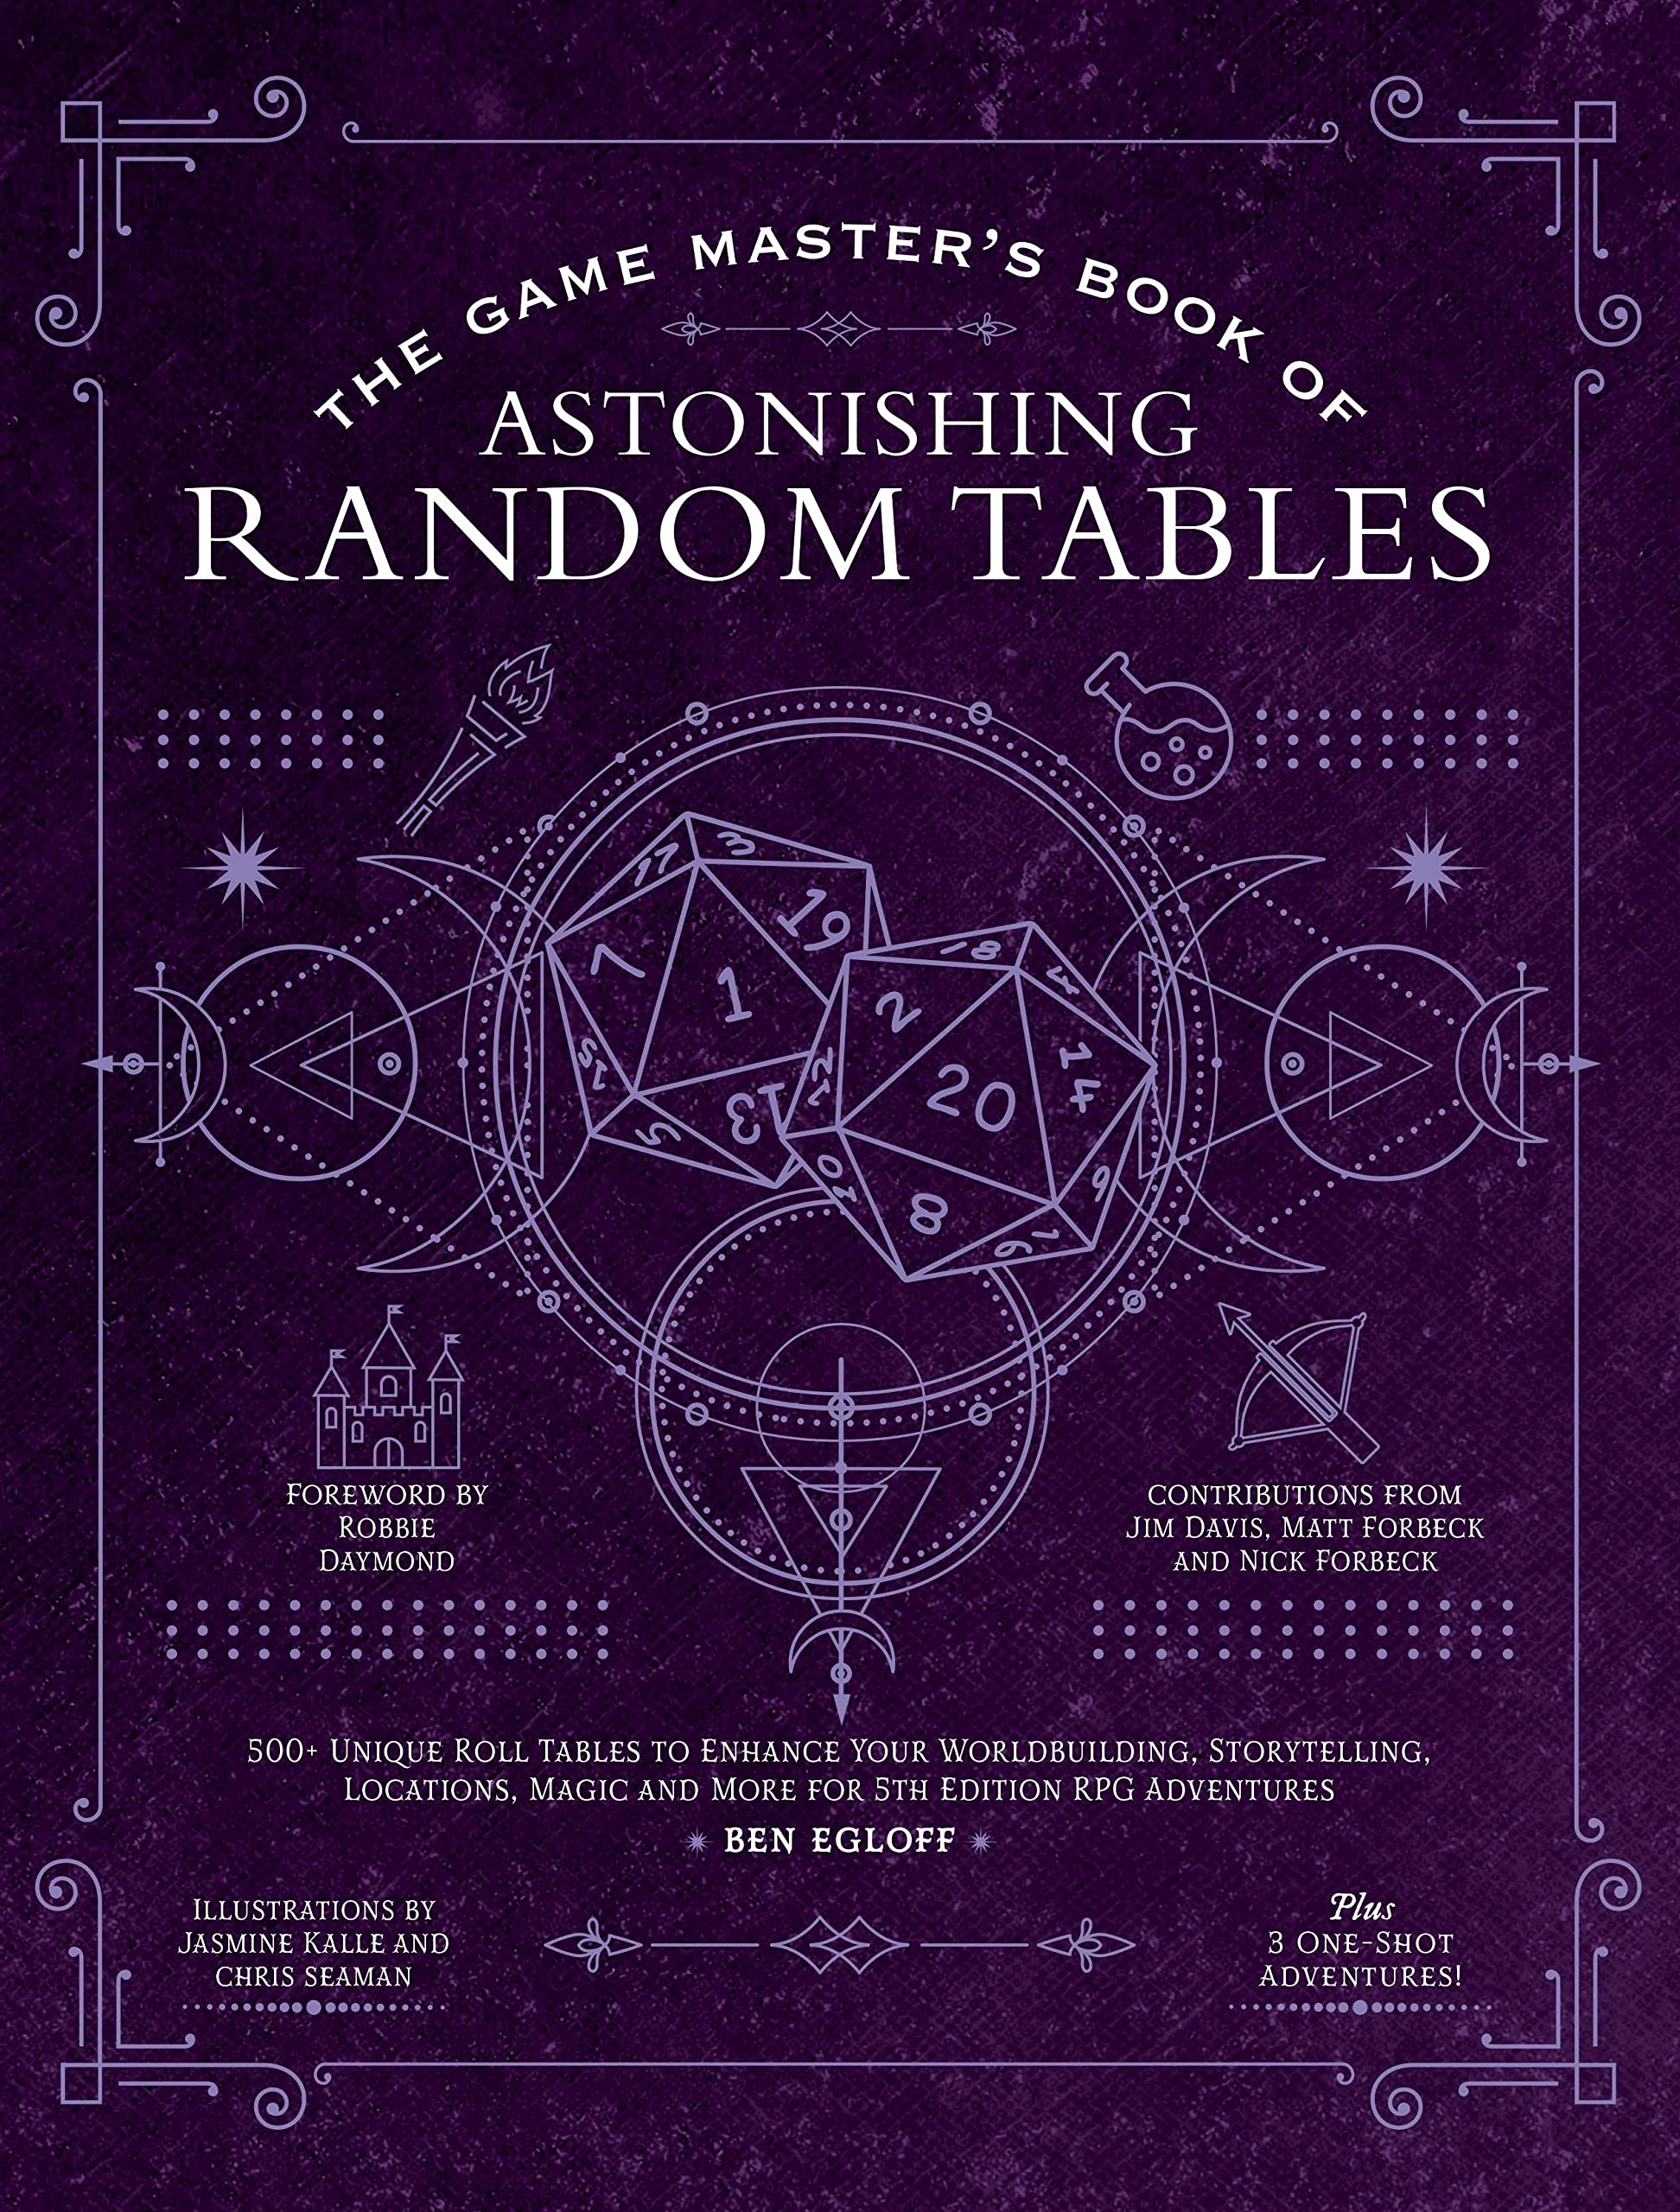 The Game Master's Book of Astonishing Random Tables: 300+ Unique Roll Tables to Enhance Your Worldbuilding, Storytelling, Locations, Magic and More fo by Egloff, Ben